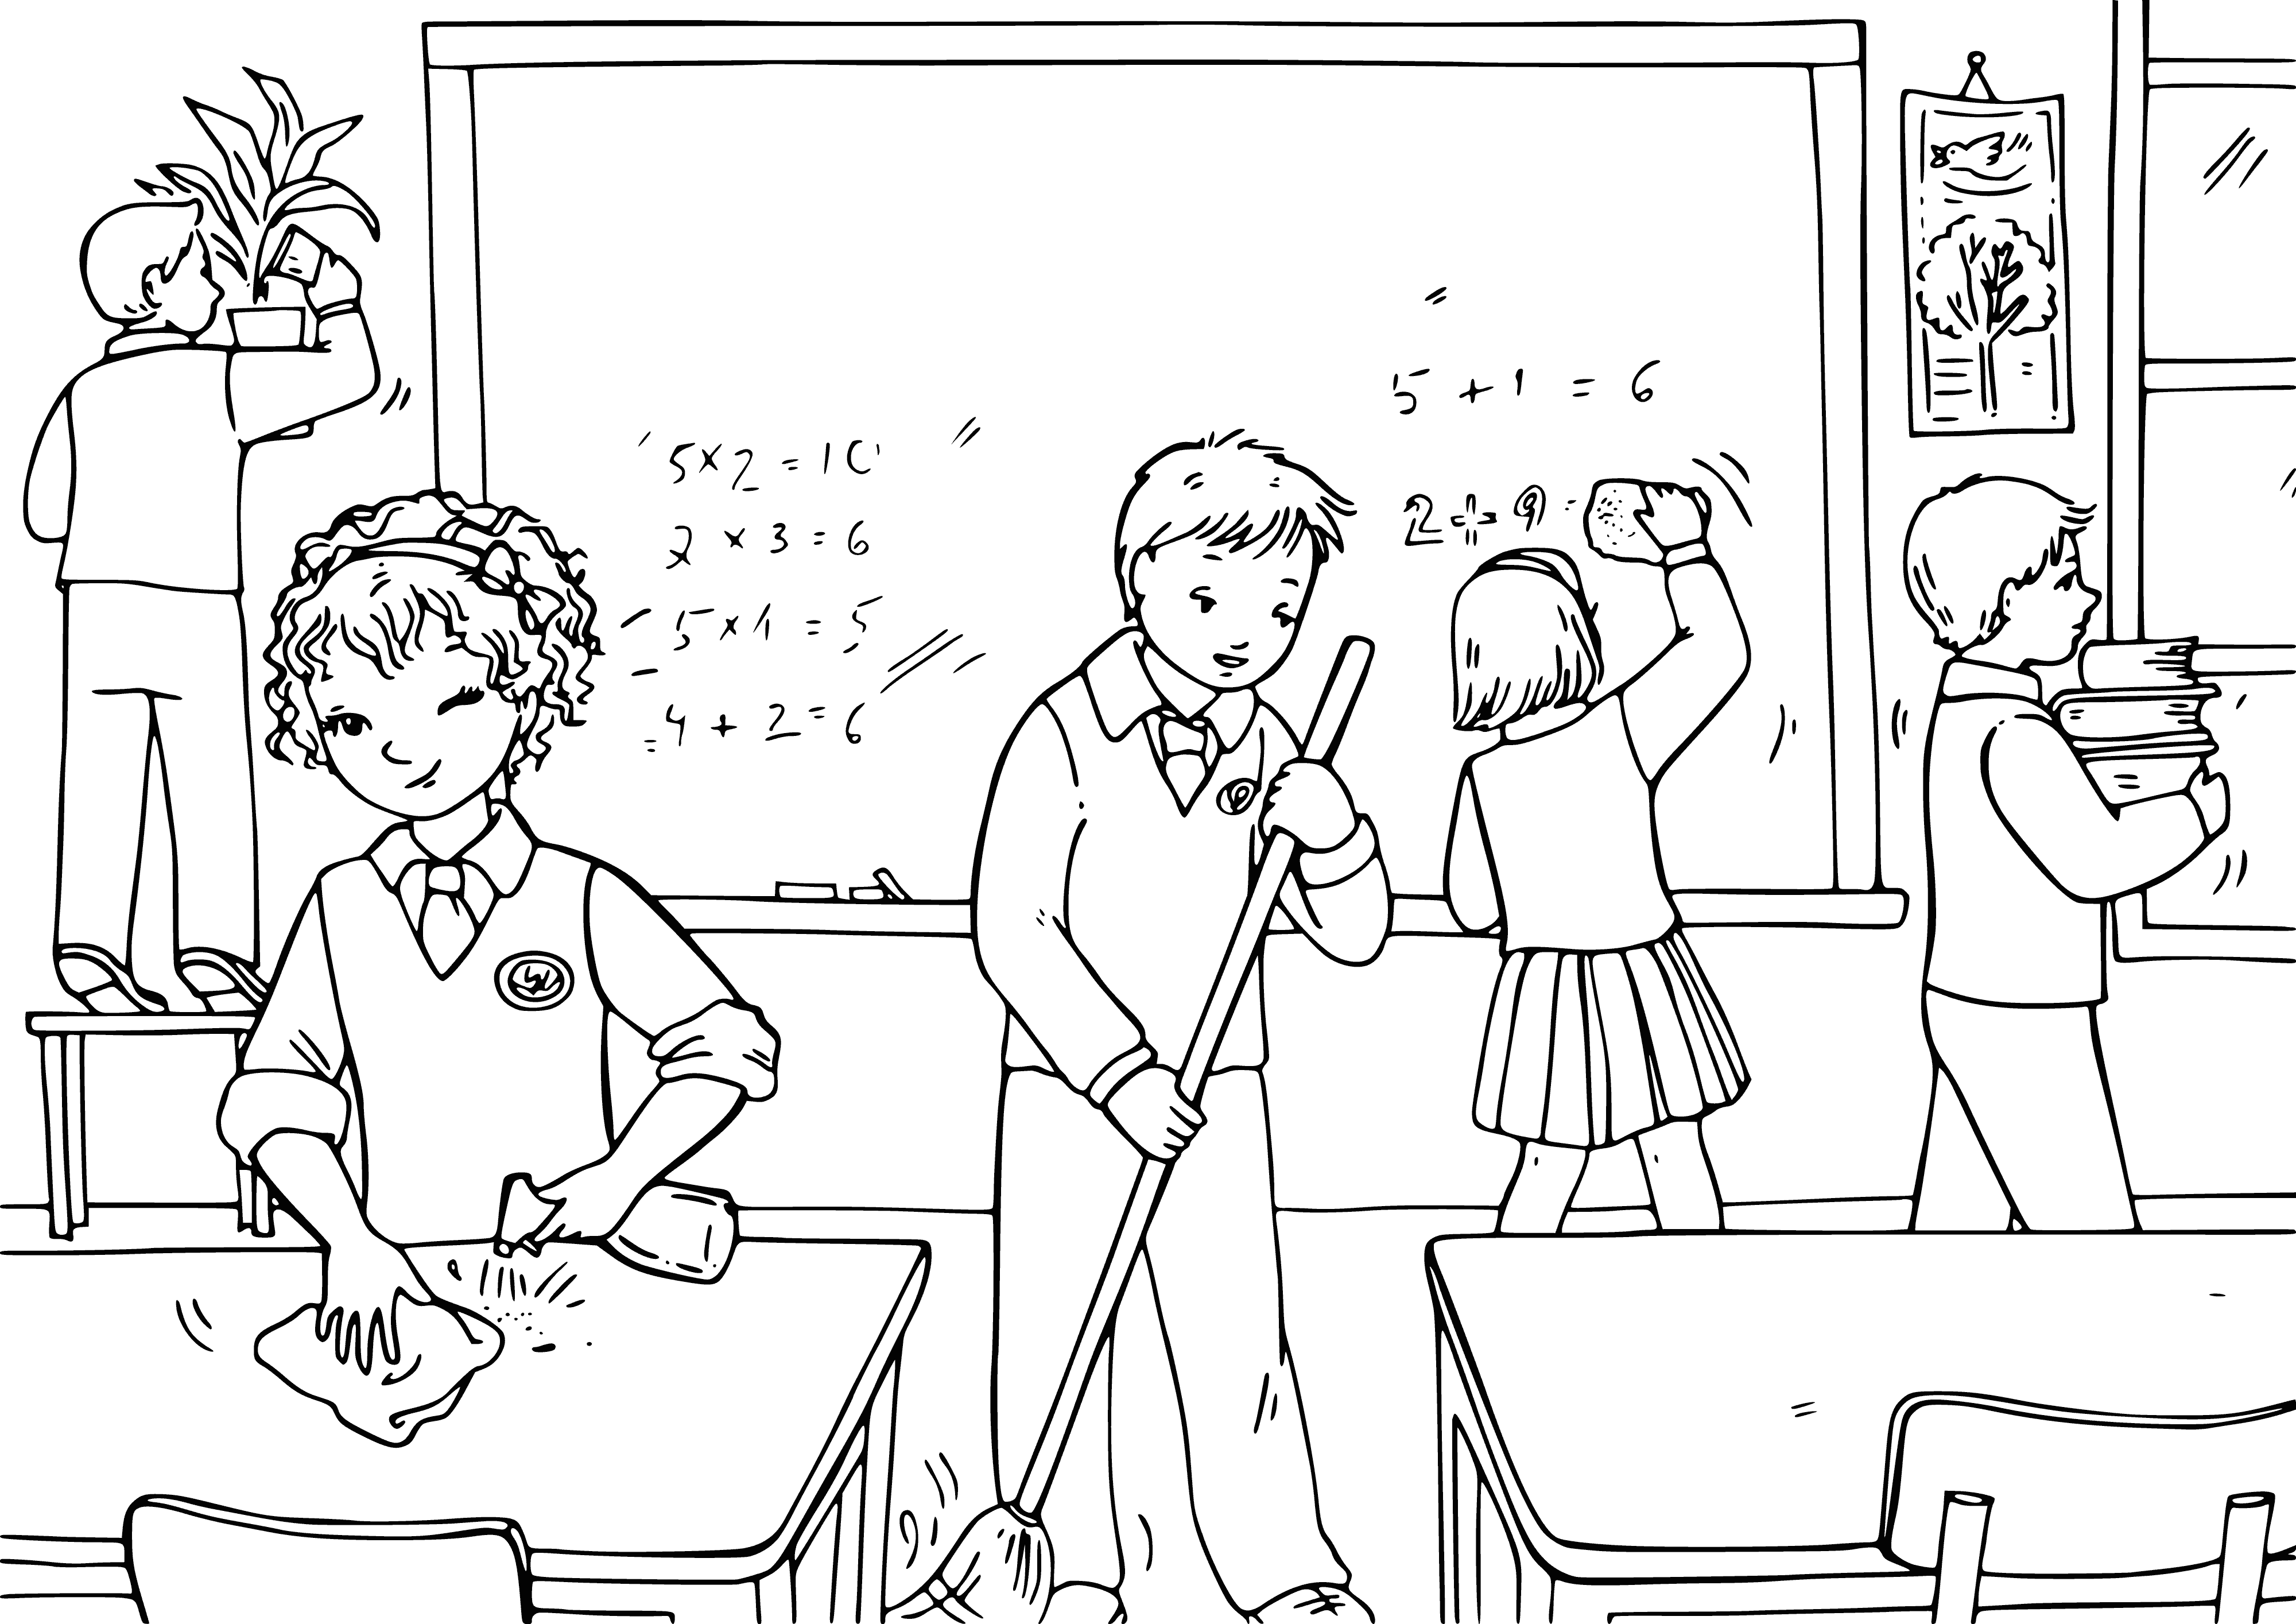 coloring page: Students clean the classroom: floors, tables, blackboard, chairs in place - the room ready for learning on 1 September, the Day of Knowledge.